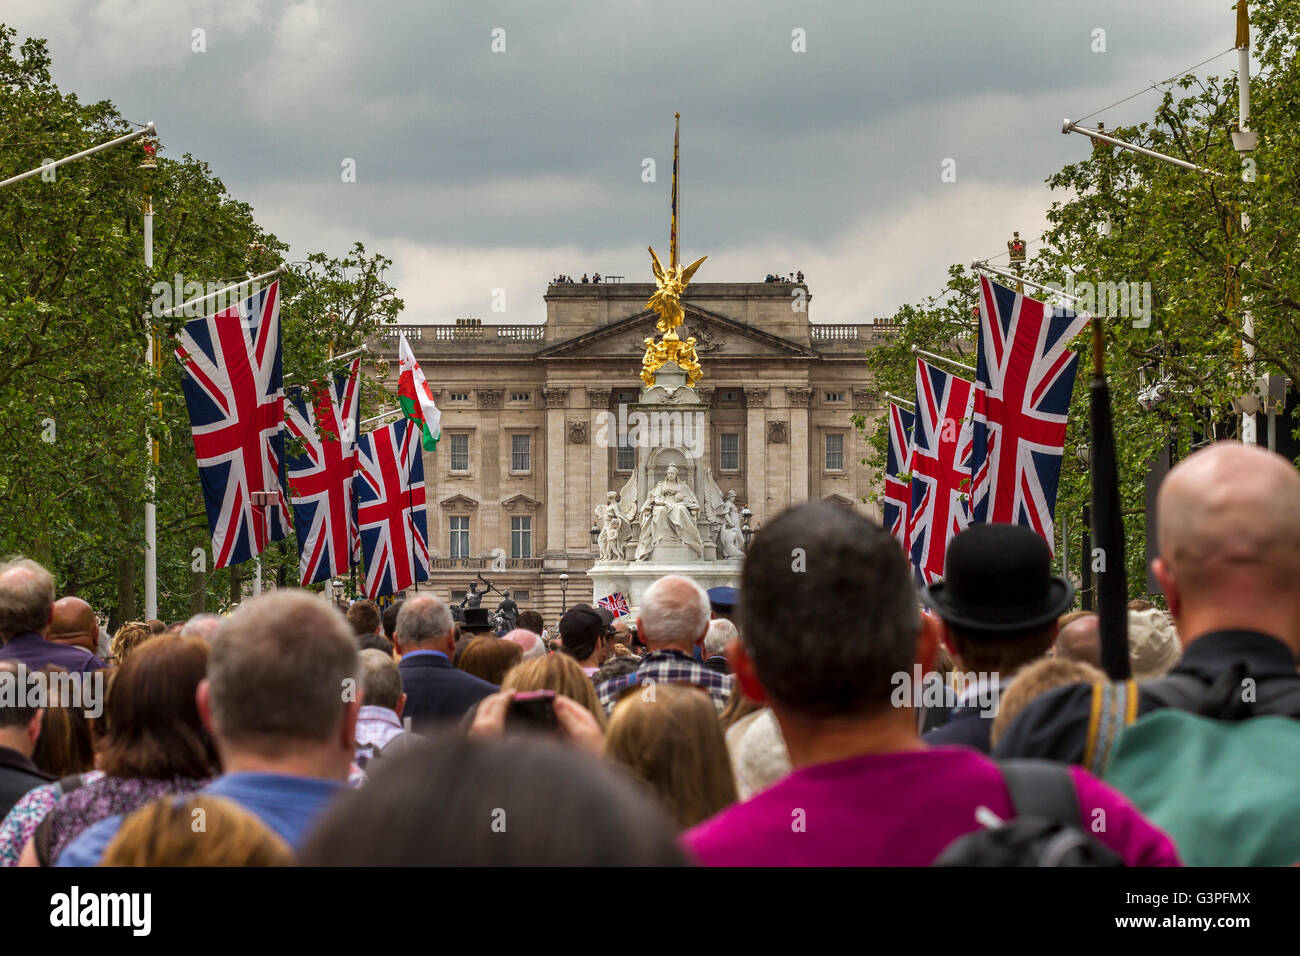 Crowds of people on The Mall  looking towards The Queen Victoria Memorial  in front of Buckingham Palace ,The Mall , London,UK Stock Photo